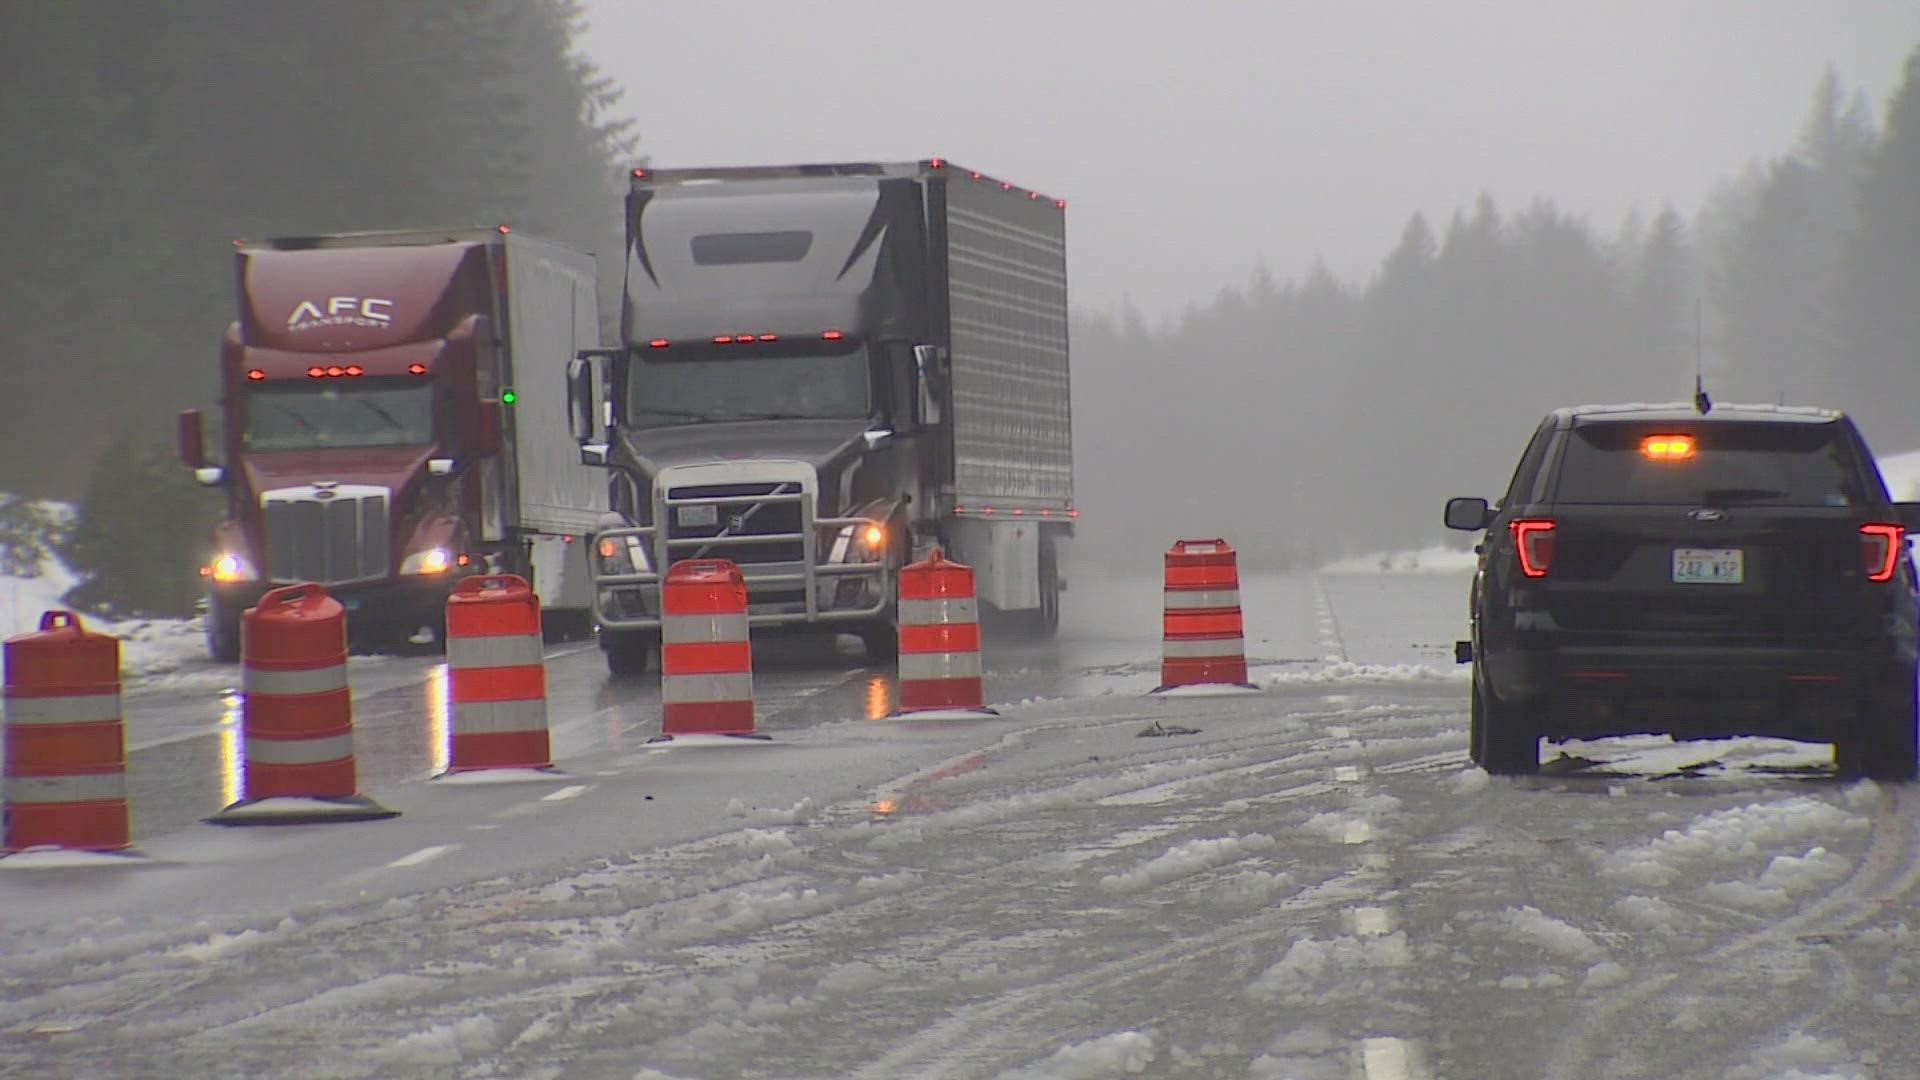 With Snoqualmie Pass closed, likely until Sunday, WSU cancels classes for Monday and Tuesday due to travel concerns.